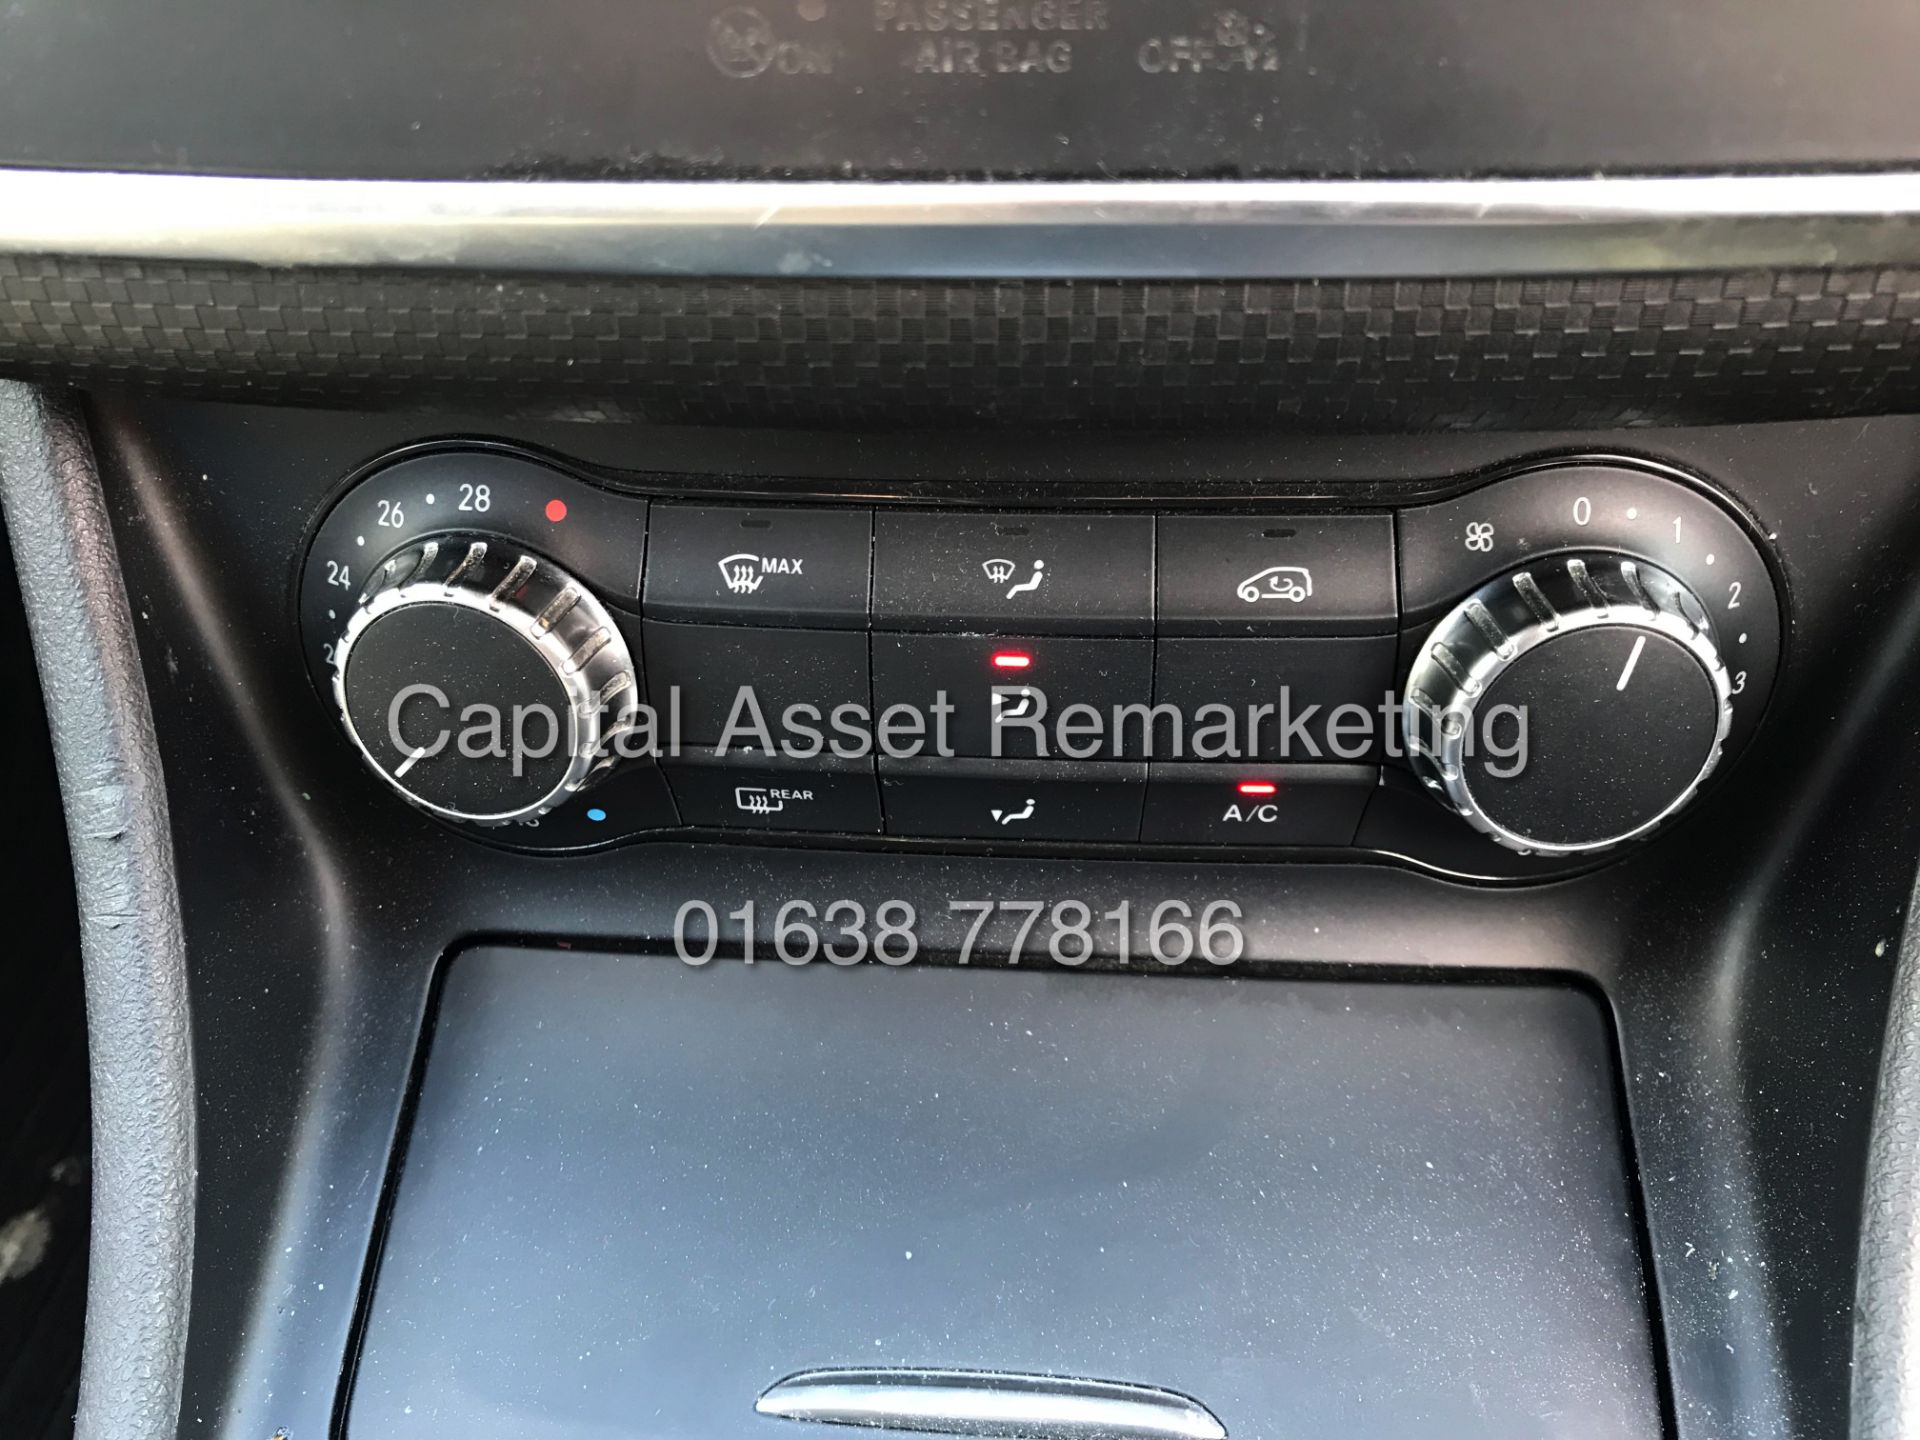 (ON SALE) MERCEDES A180d "SPORT" (15 REG) ONLY 1 OWNER FSH - SAT NAV - LEATHER - AIR CON - CRUISE - Image 17 of 21